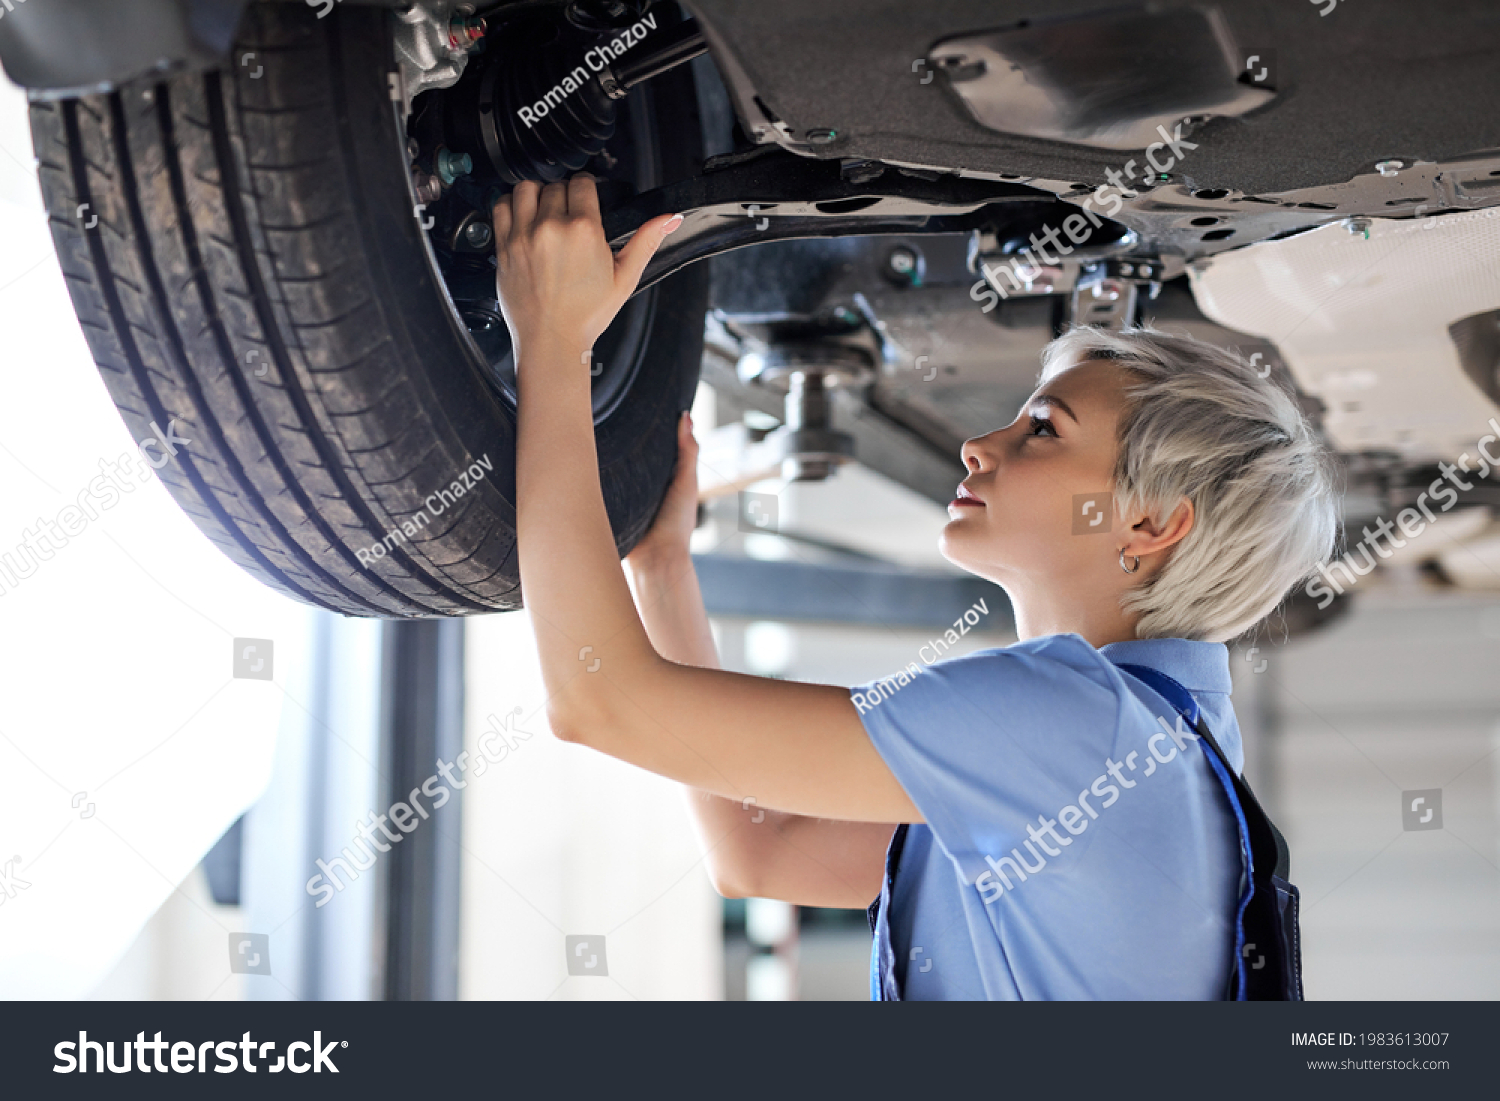 Caucasian female auto mechanic changing wheel tire in car in garage, side view. Beautiful young lady in overalls is concentrated on work, carefully adjusting repairing #1983613007